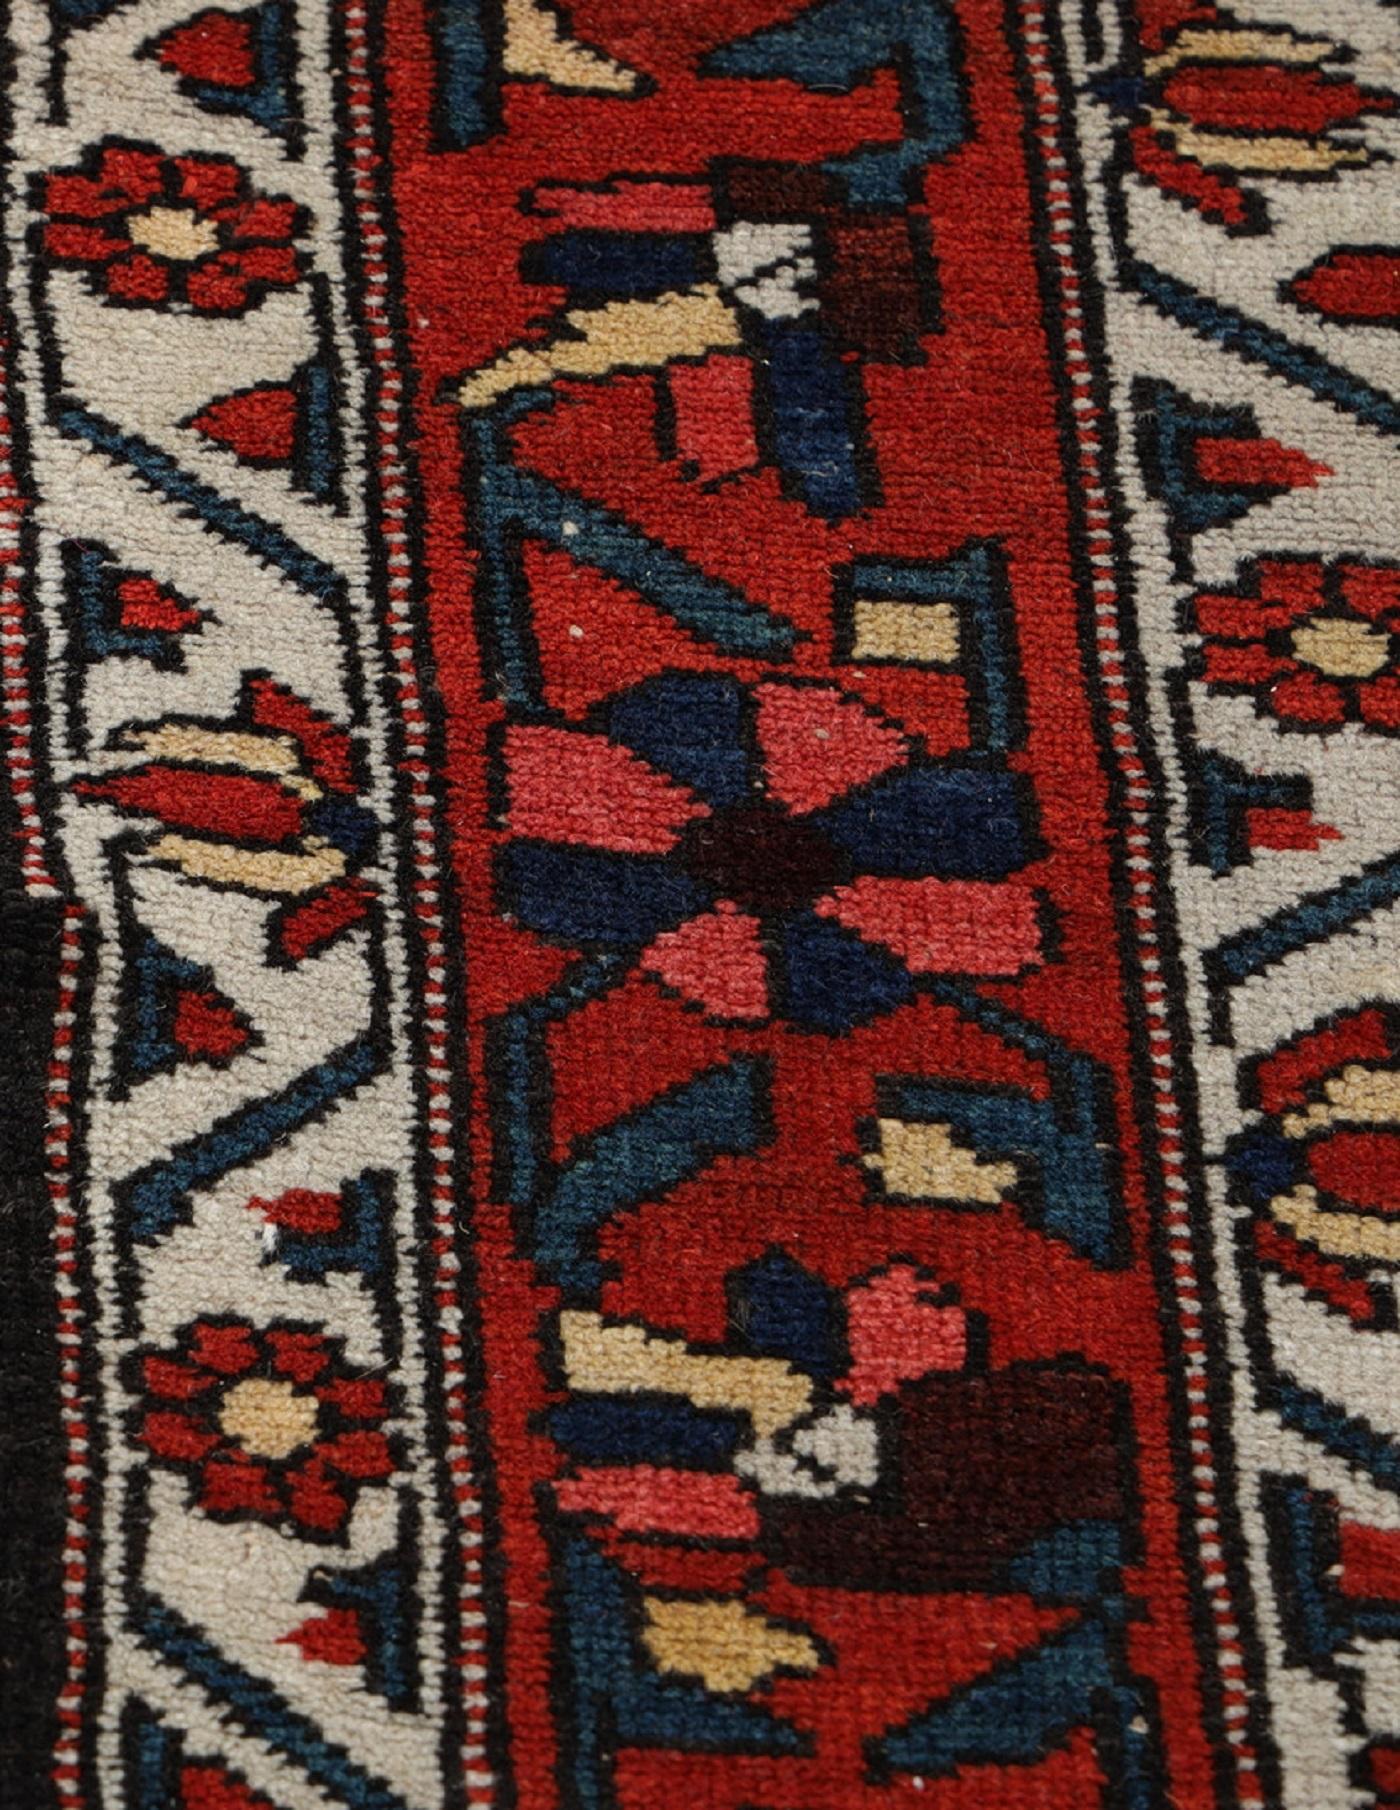 This traditional carpet handwoven area rug was constructed in the 1890s. It features a highly detailed central medallions woven on a deep red field in accents of ivory blue and red. Handwoven with hand-spun wool, which was organically dyed using